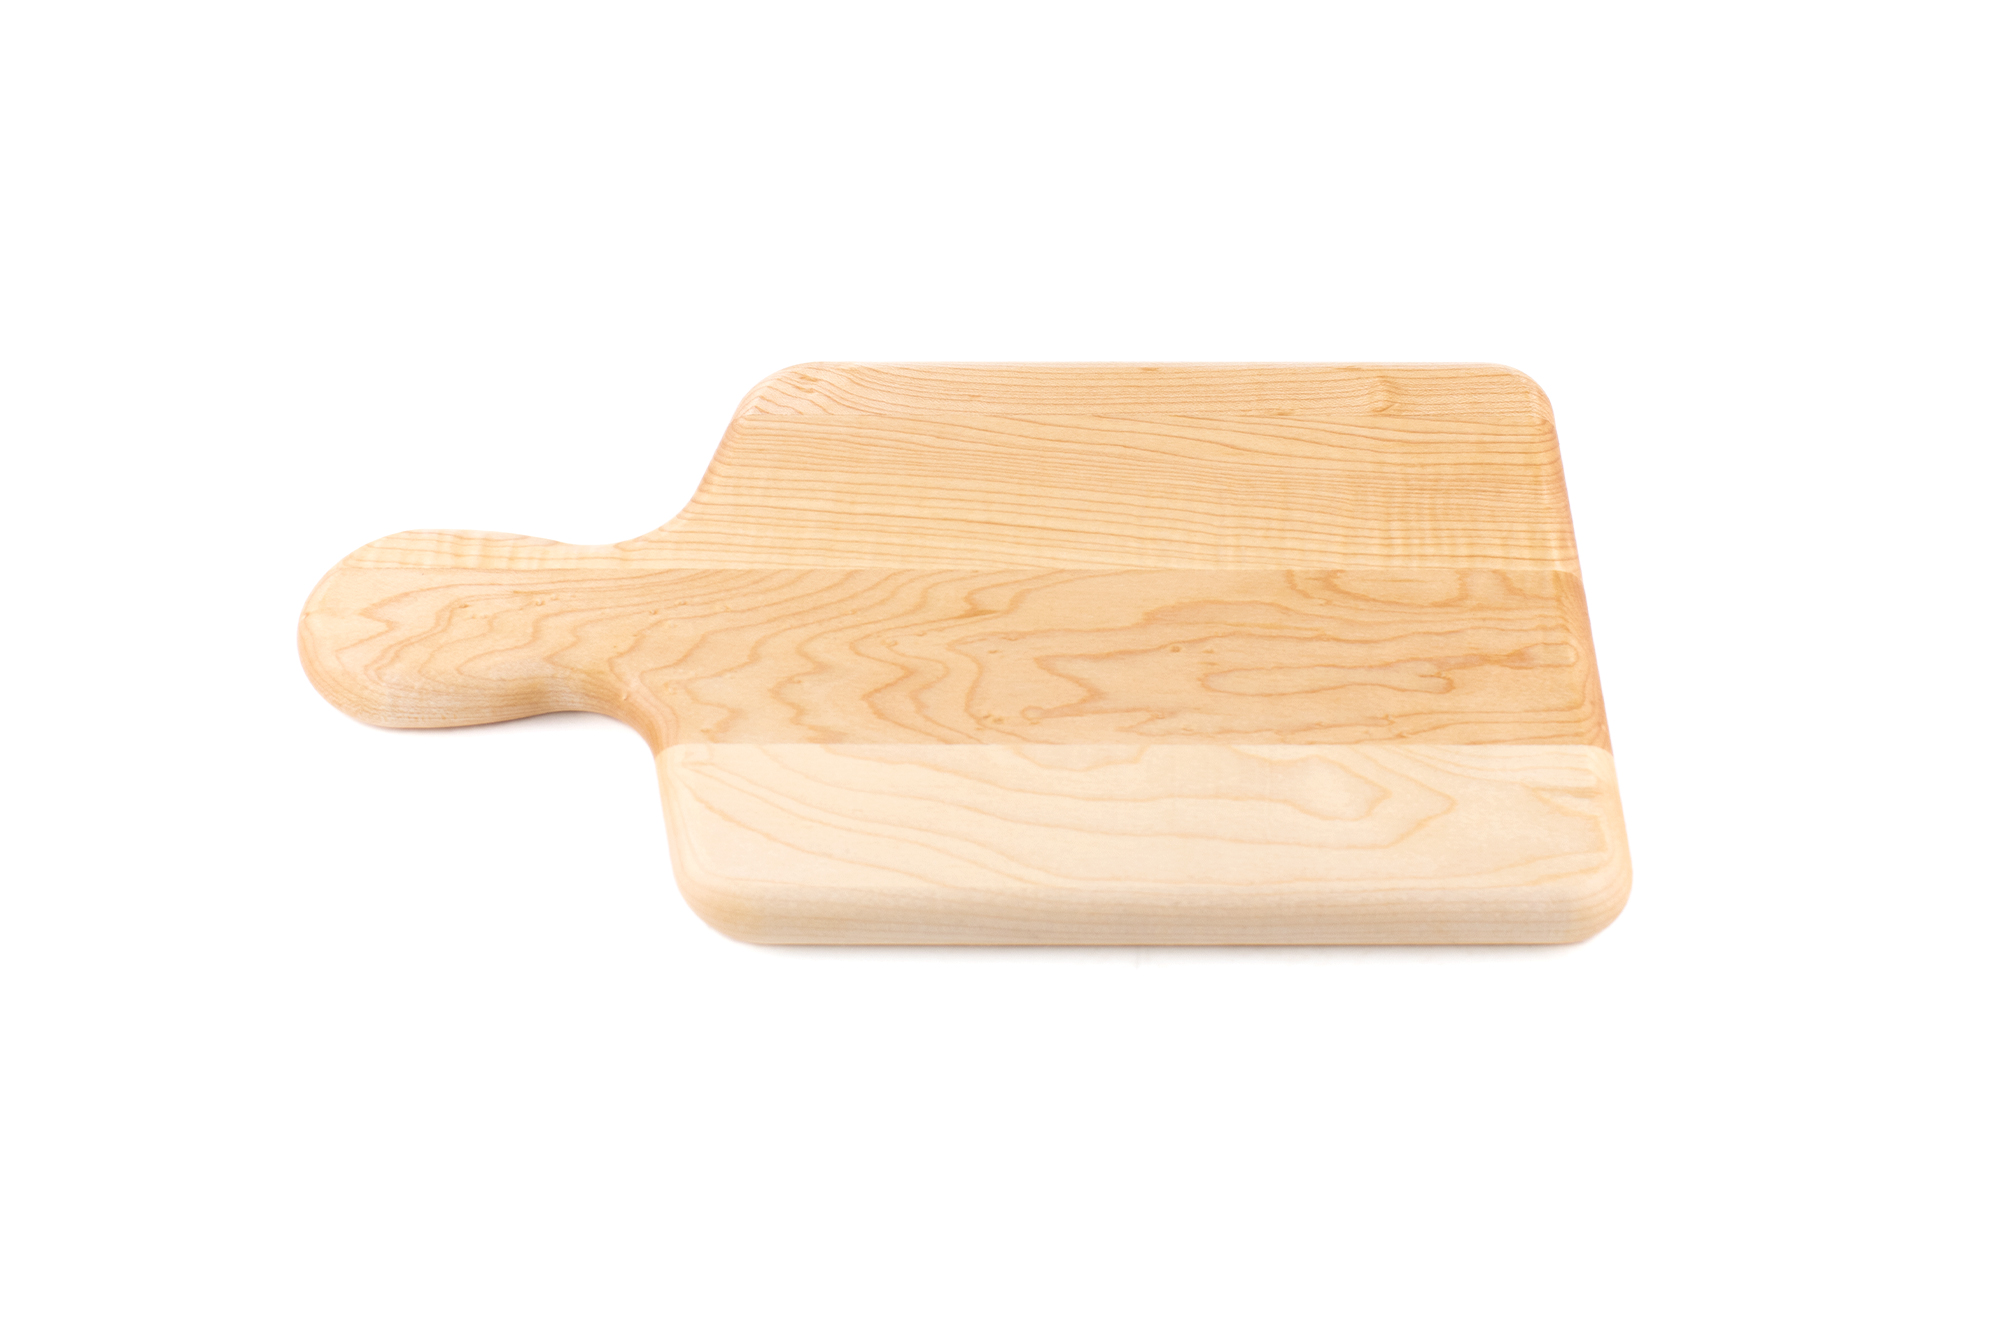 Maple wood cutting/serving board with handle and bullnose edges 